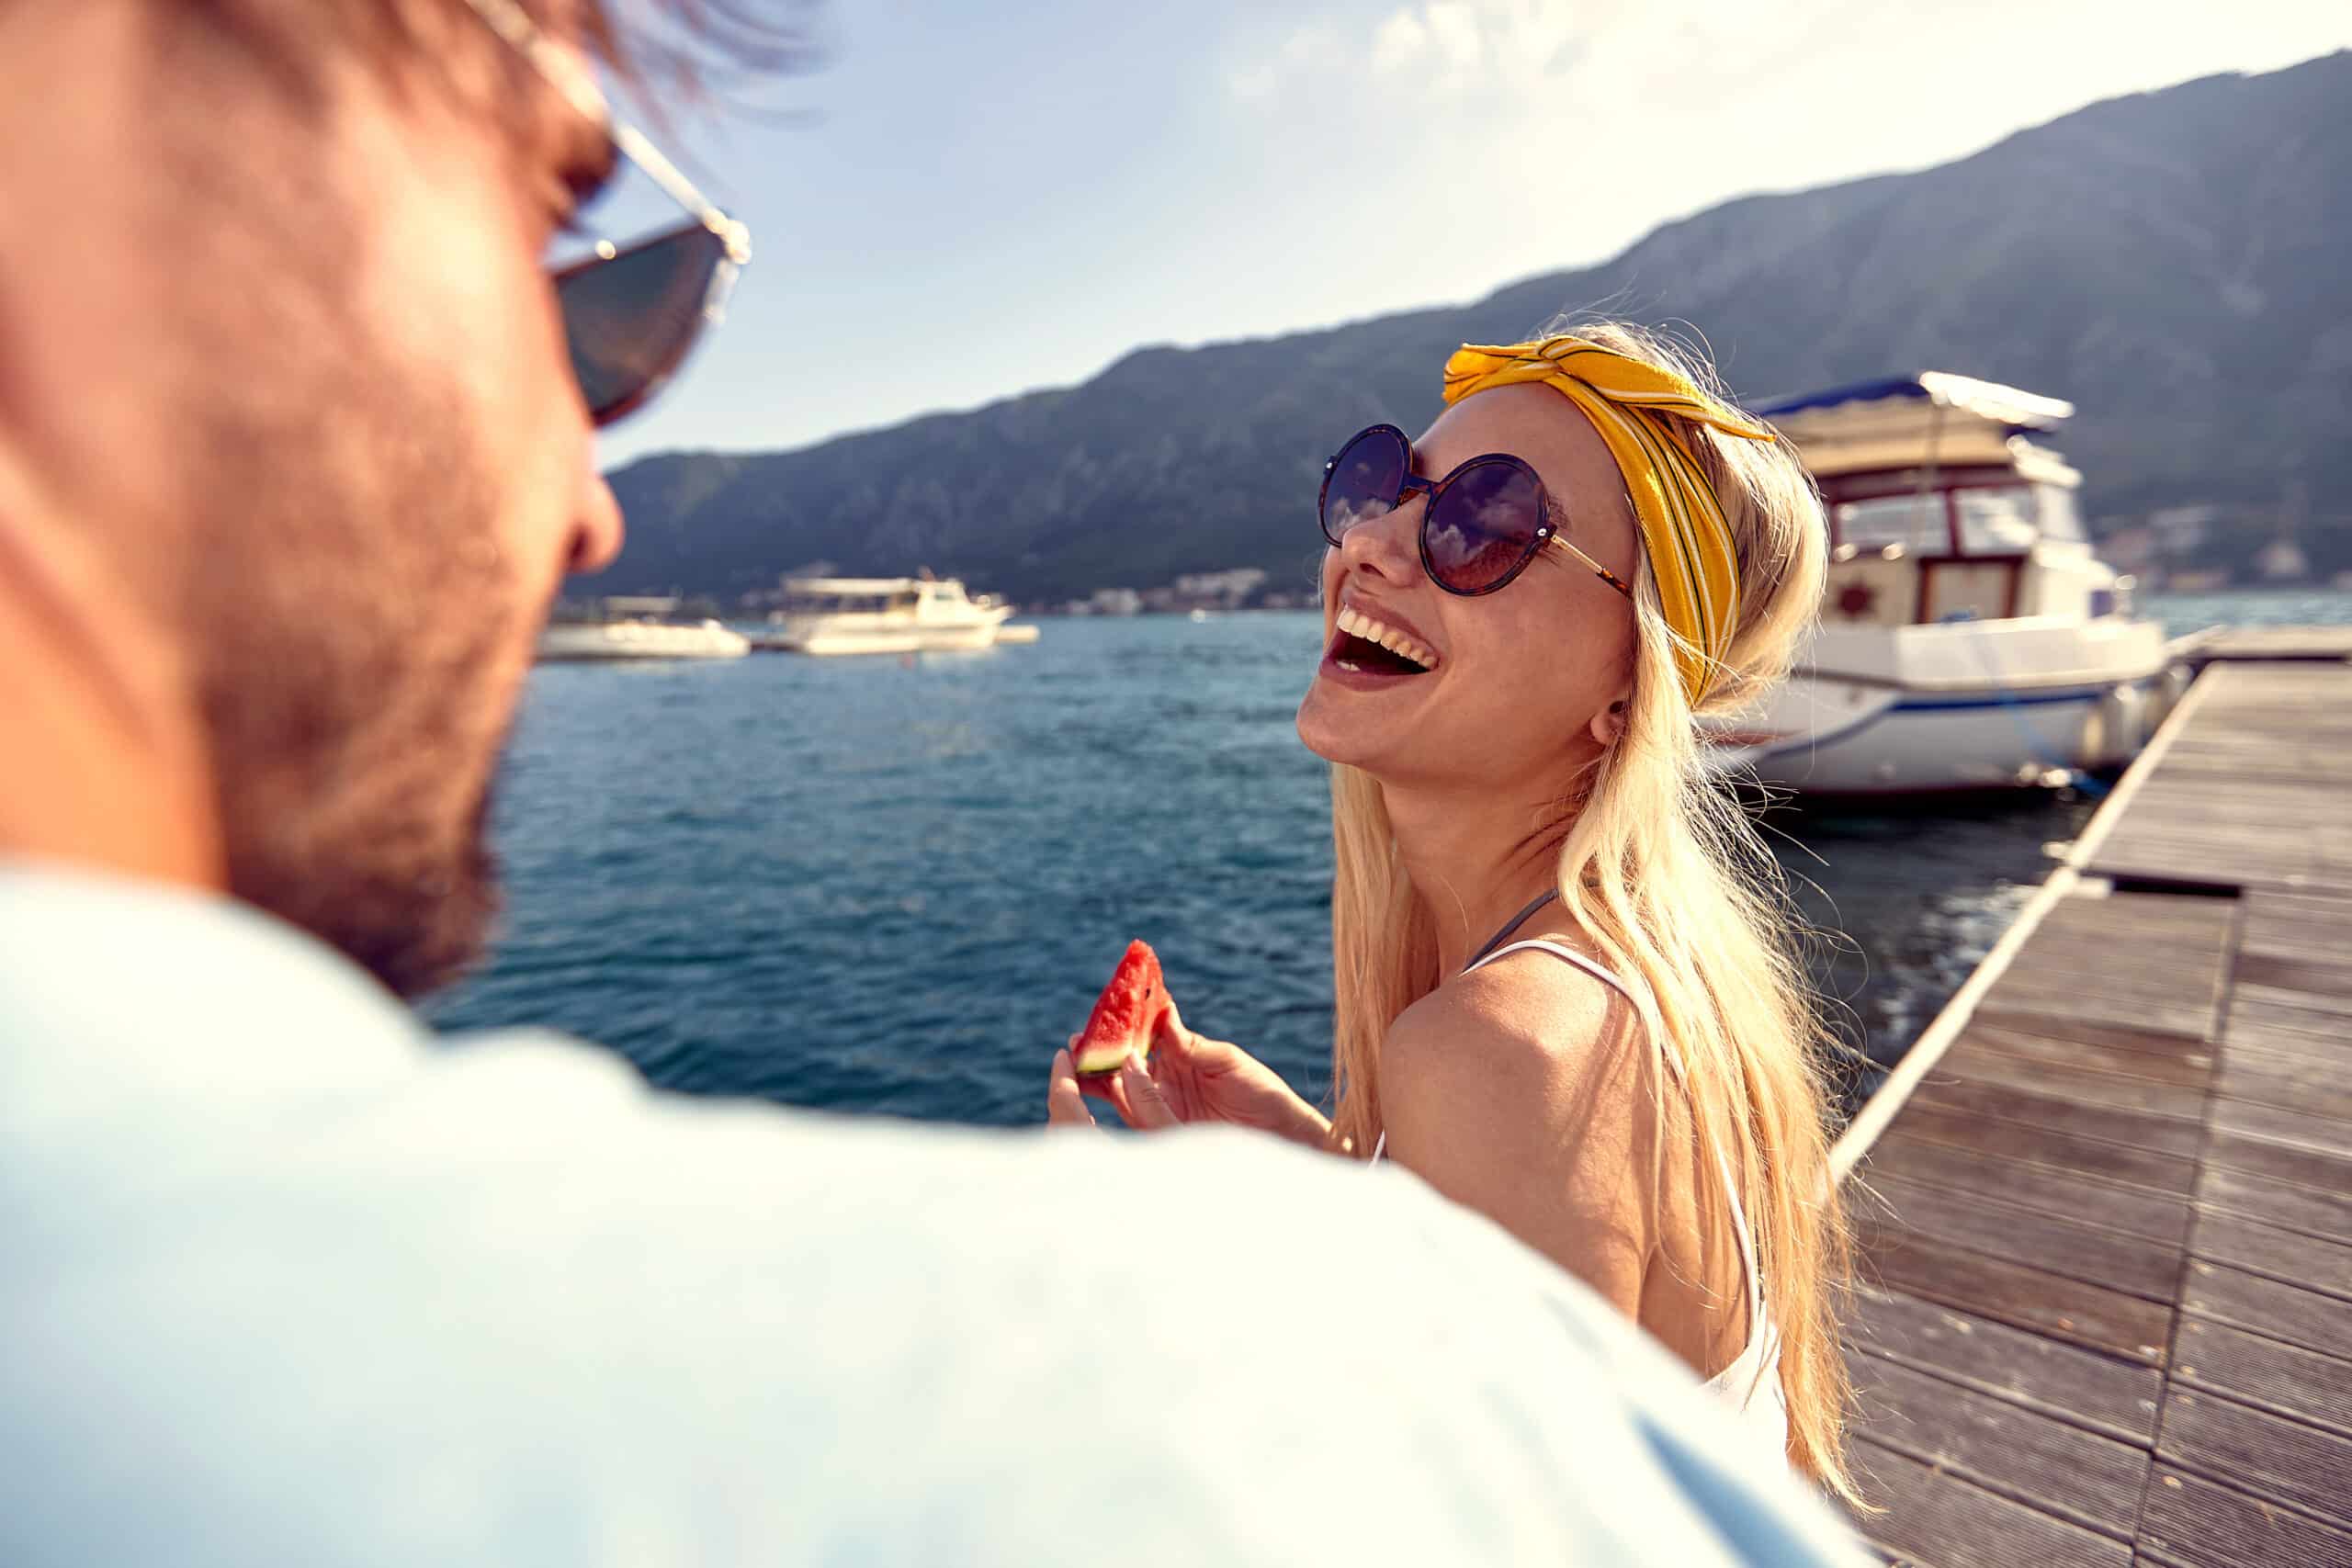 at a dock, a beautiful smiling blonde holding sliced watermelon and looking at her lover